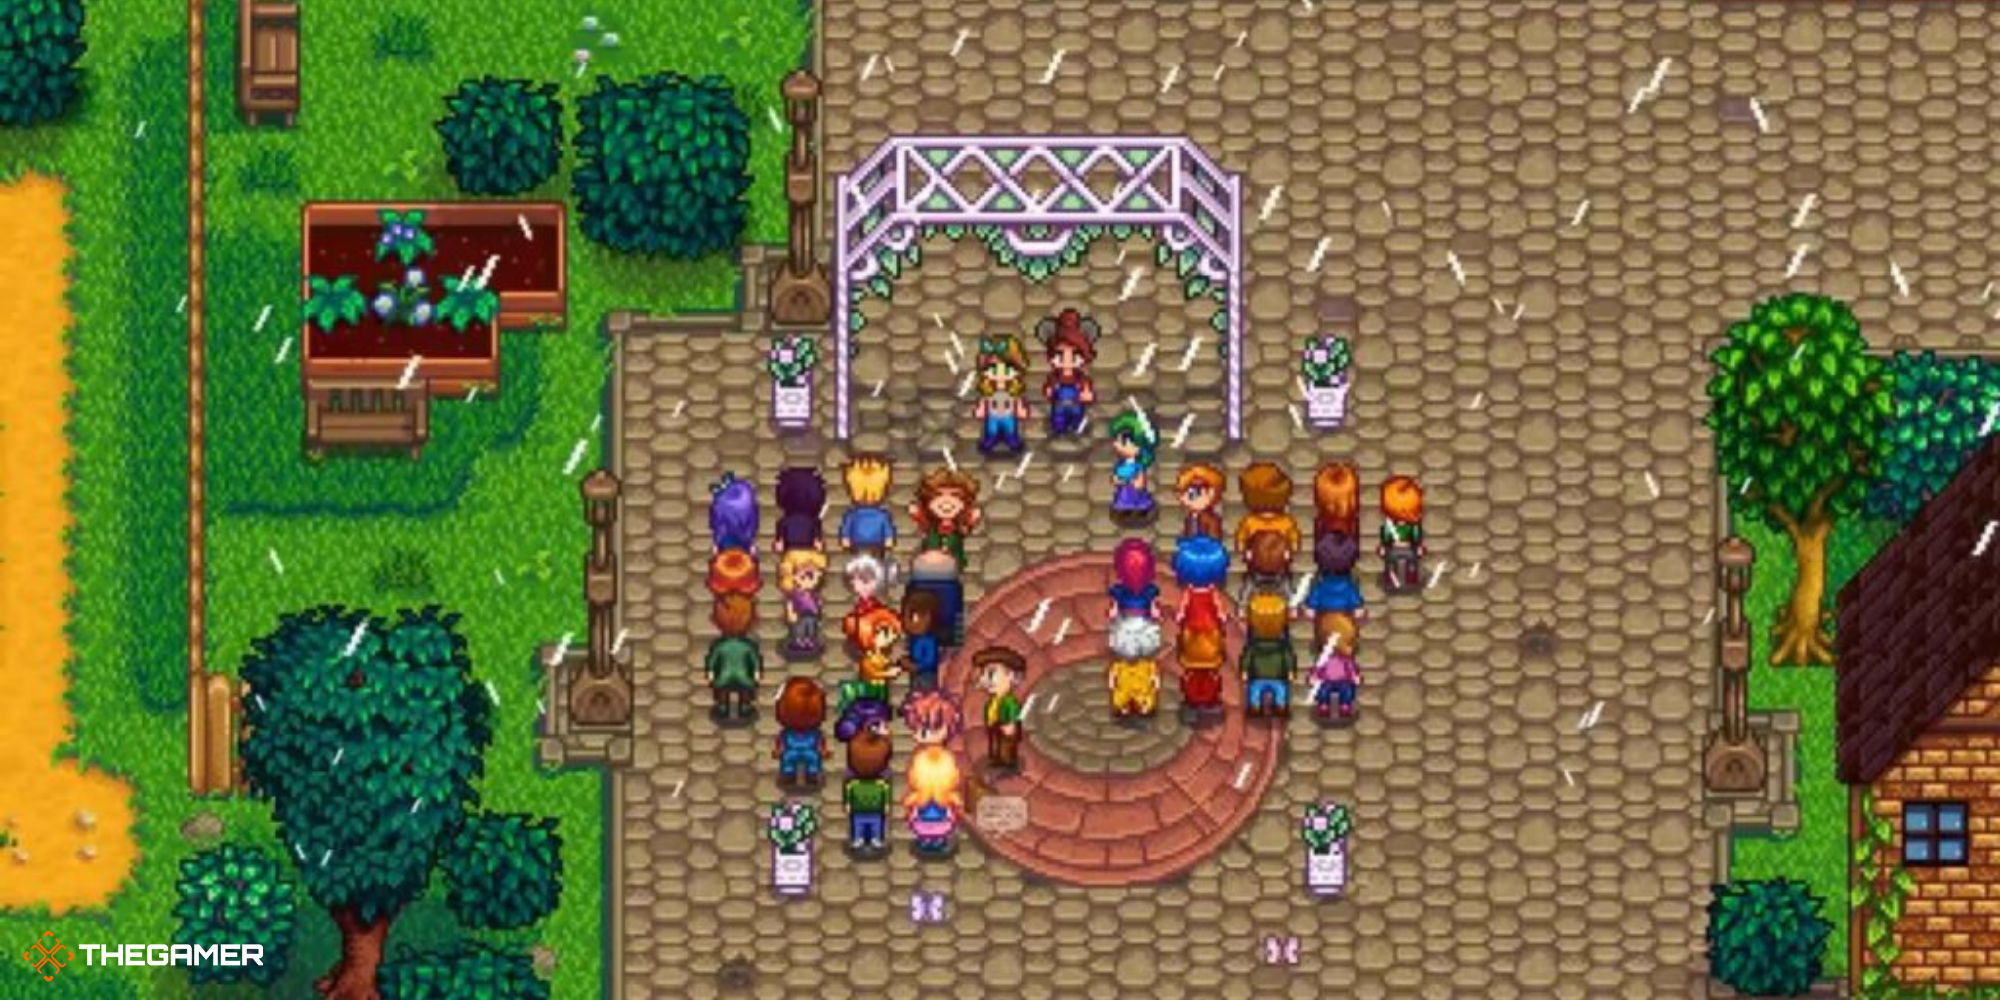 Stardew Valley - Marriage ceremony between two players